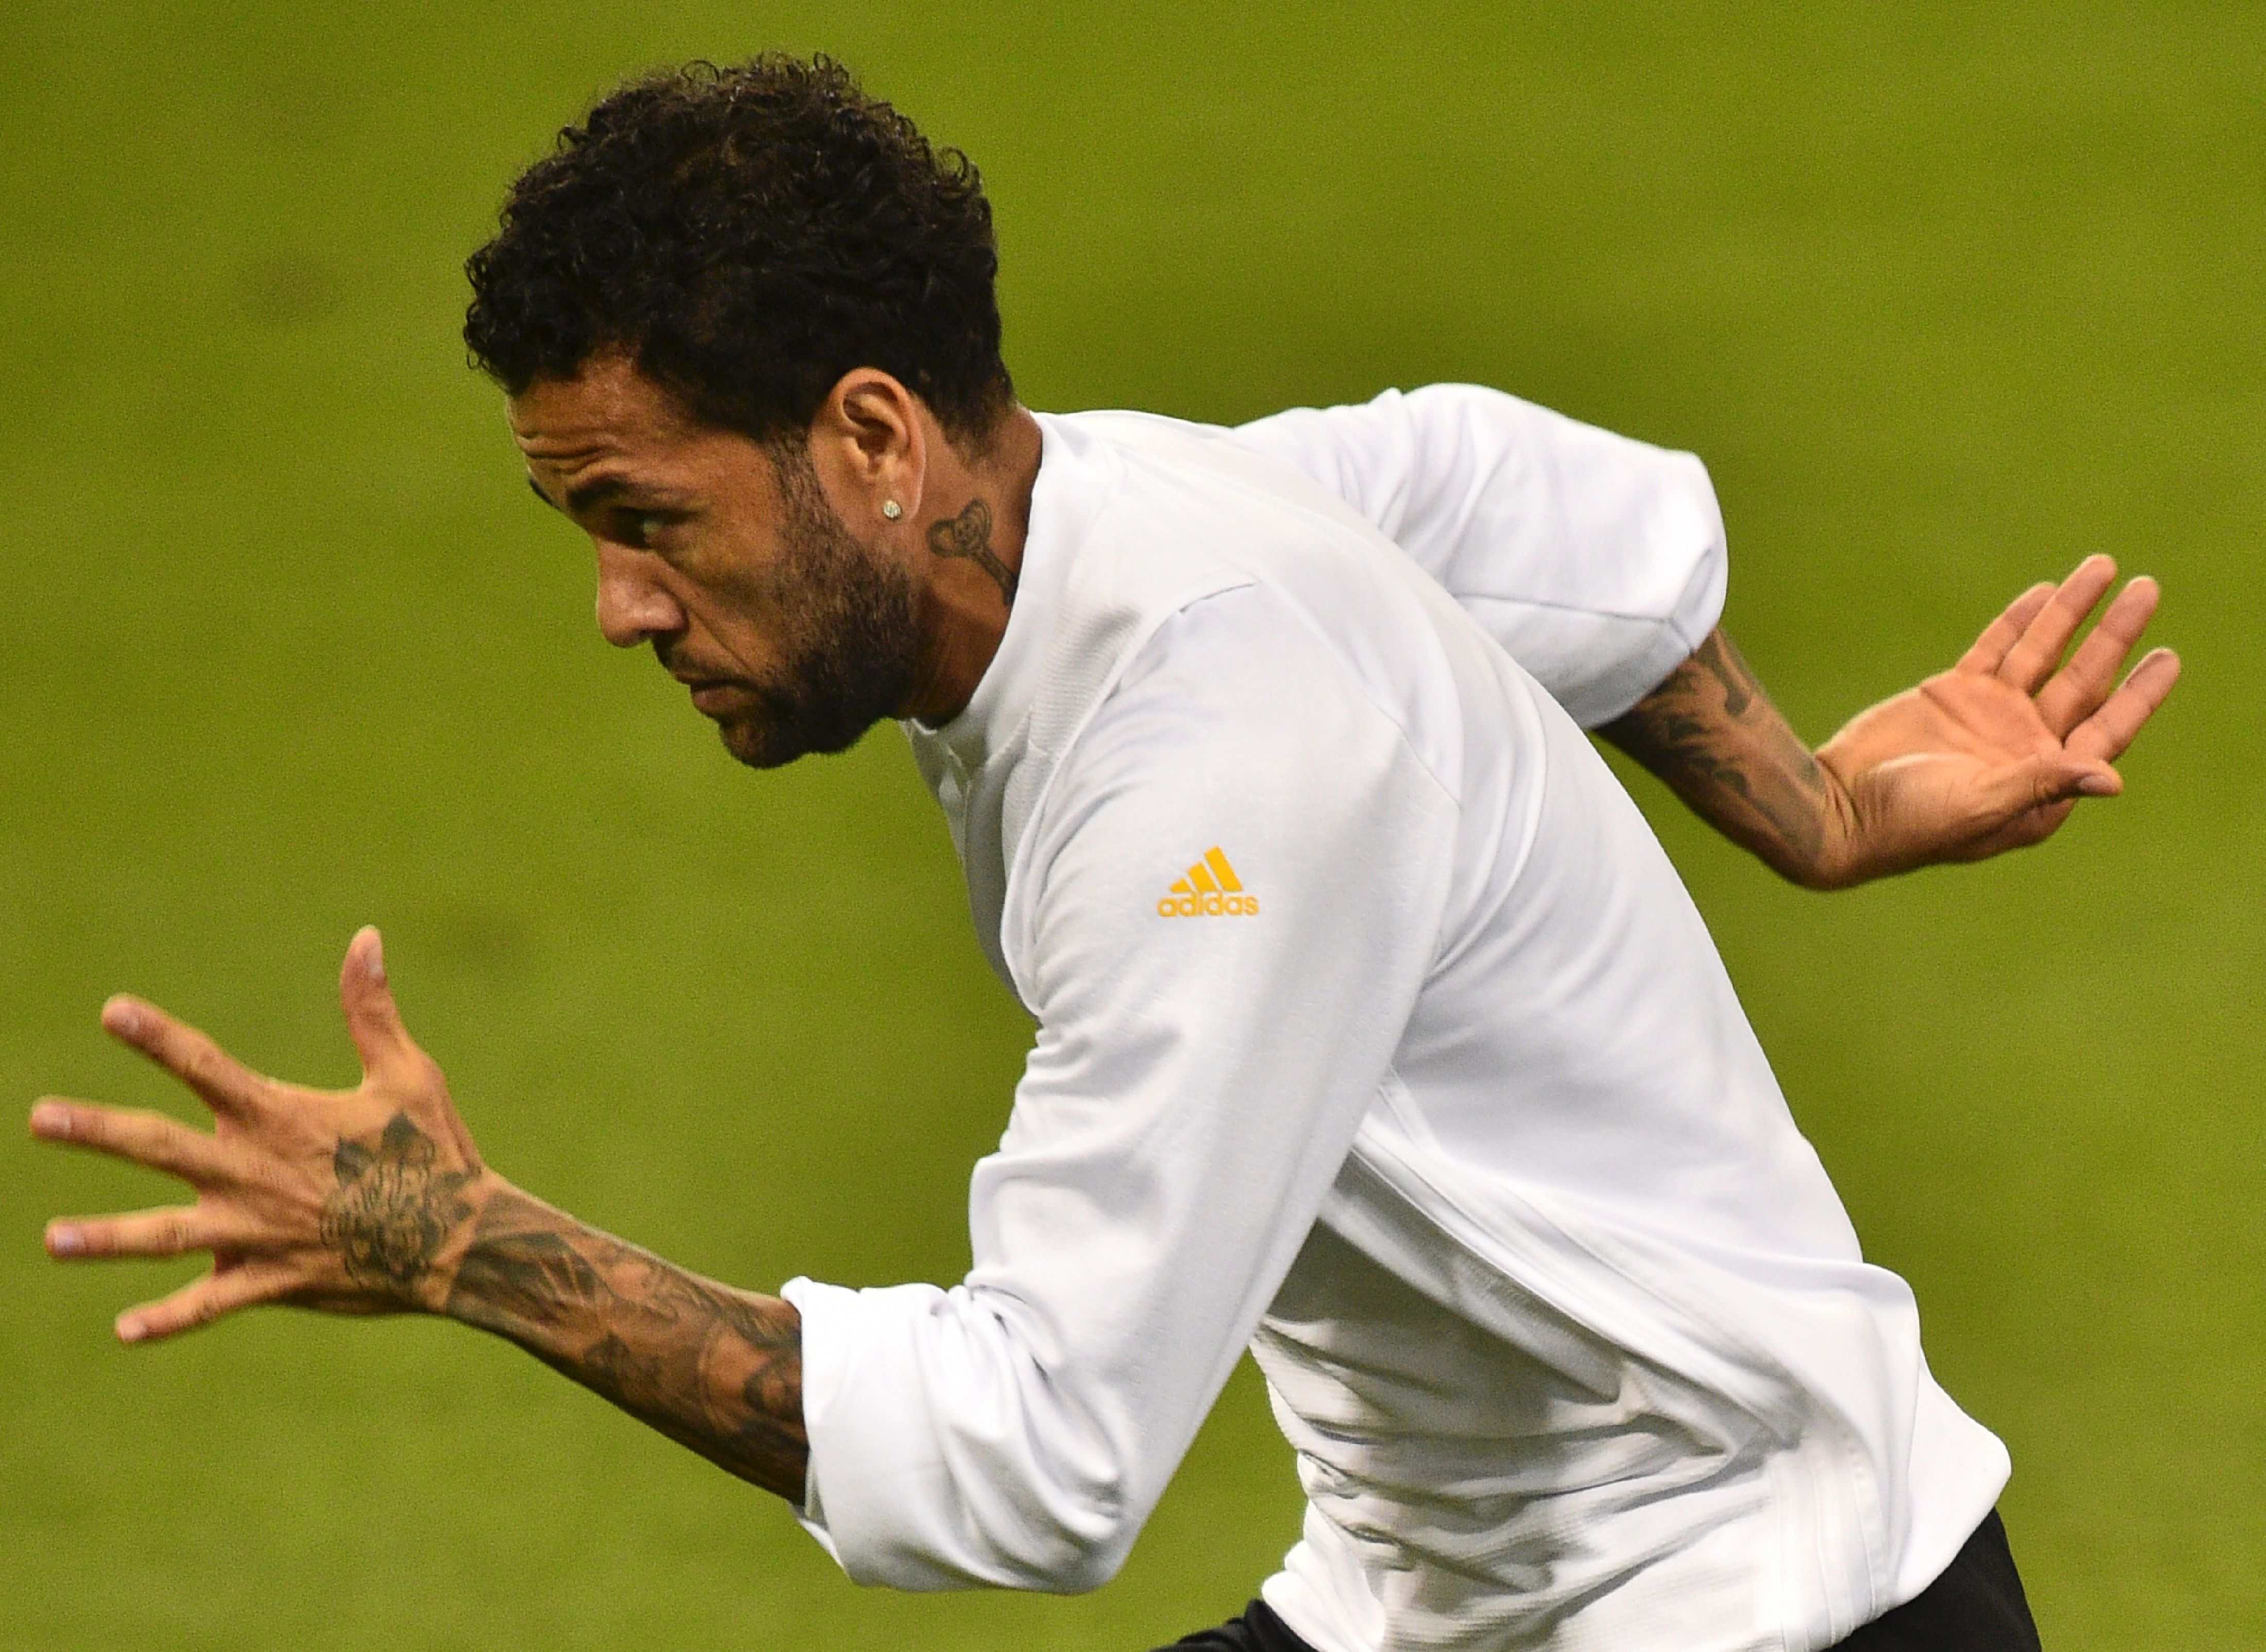 Juventus' Brazilian defender Dani Alves attends a training session at The Principality Stadium in Cardiff, on June 2, 2017, on the eve of the UEFA Champions League final football match between Juventus and Real Madrid. / AFP PHOTO / Glyn KIRK        (Photo credit should read GLYN KIRK/AFP/Getty Images)